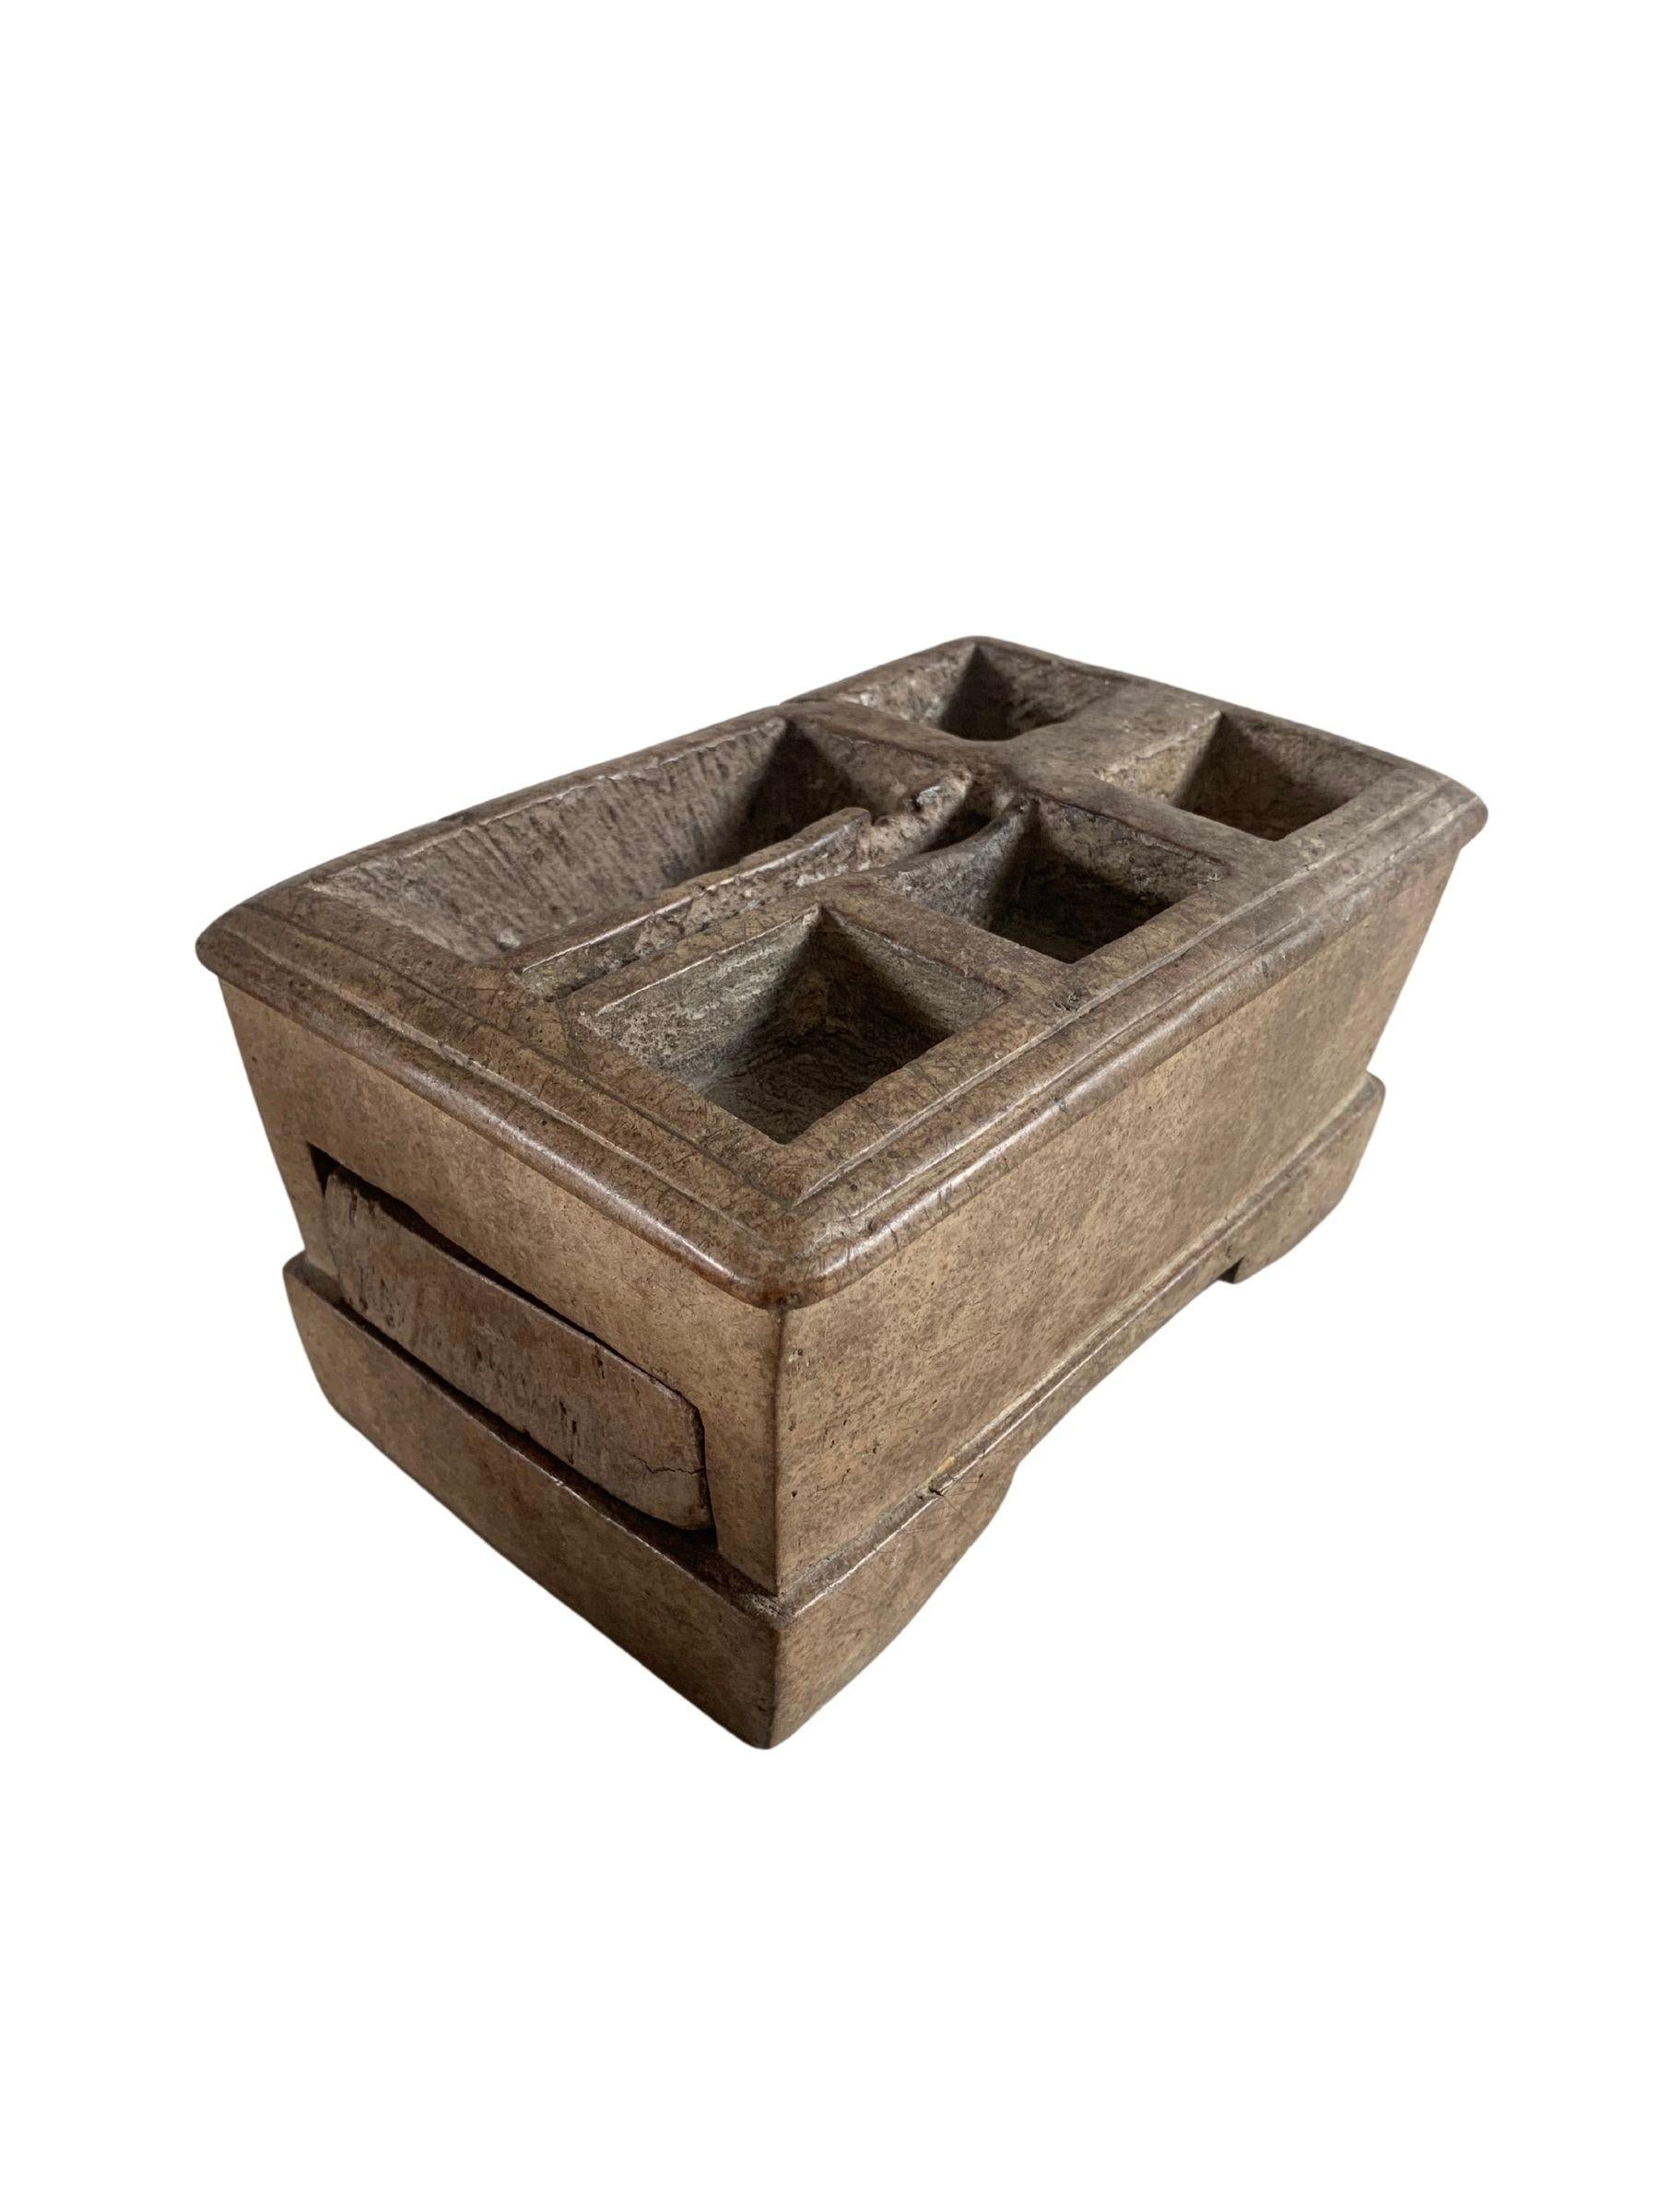 Hand-Carved Betel Nut Box from Java, Indonesia, c. 1900